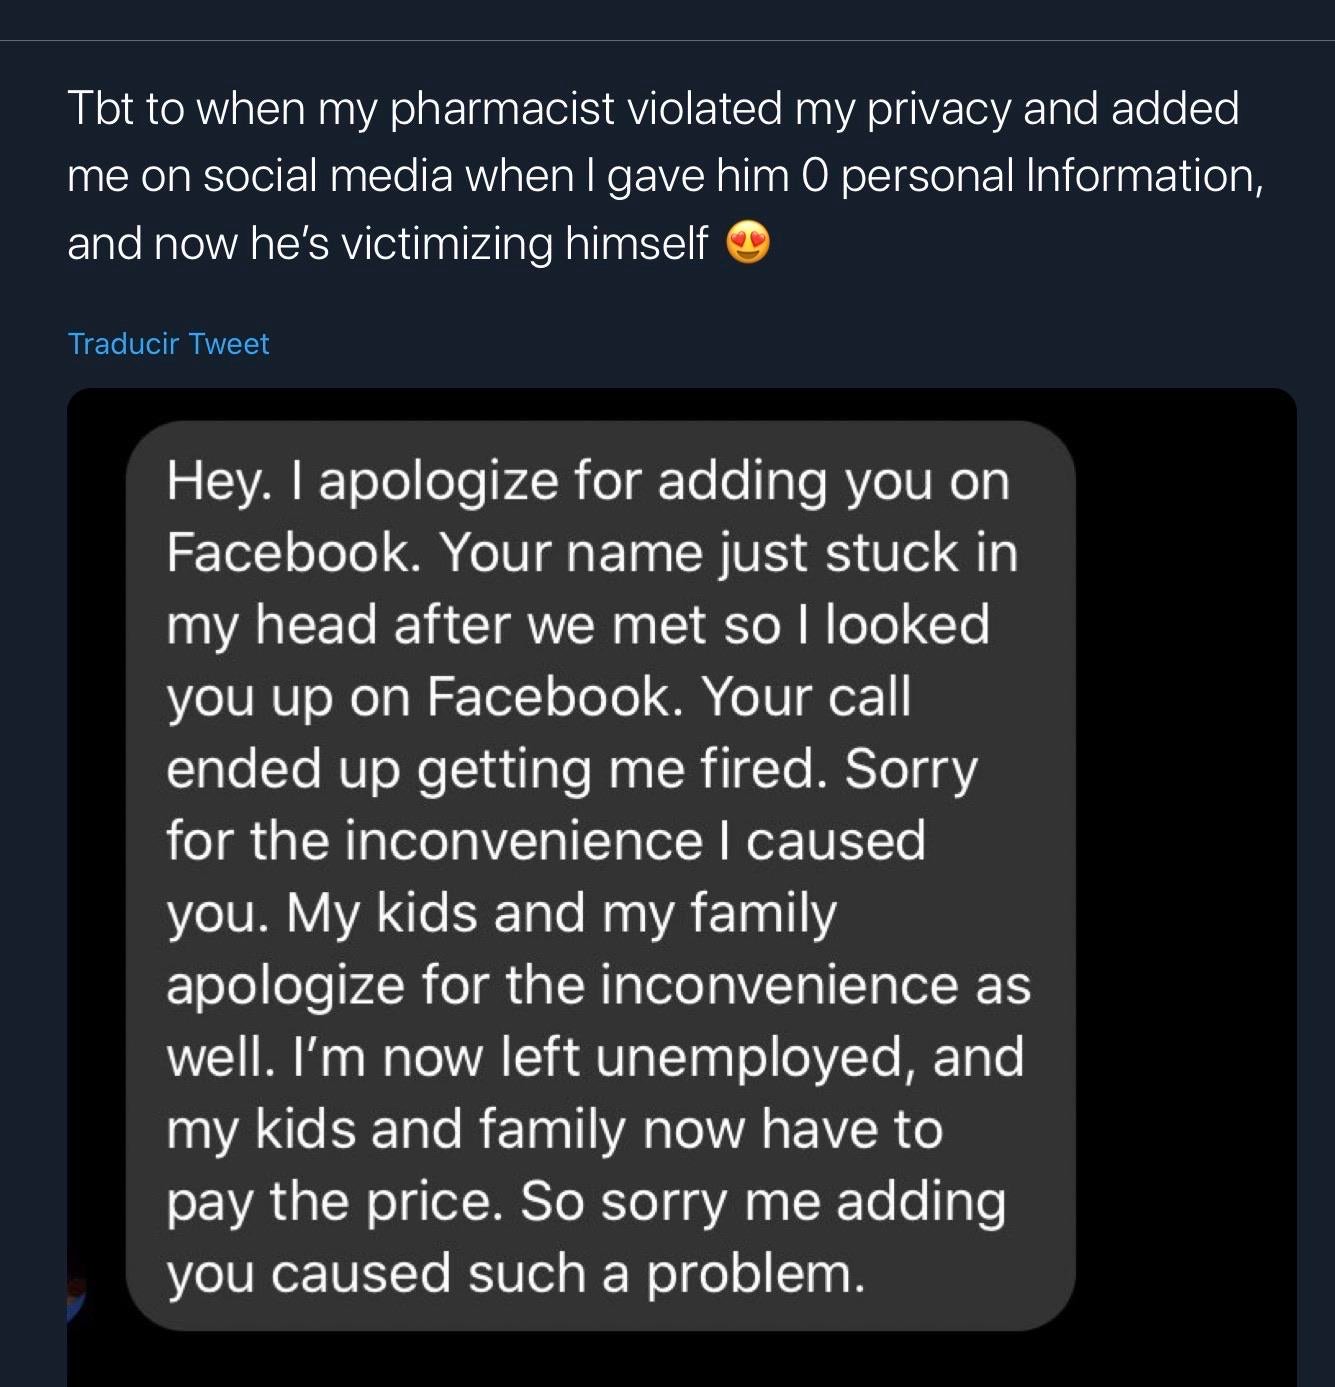 screenshot - Tbt to when my pharmacist violated my privacy and added me on social media when I gave him O personal Information, and now he's victimizing himself Traducir Tweet Hey. I apologize for adding you on Facebook. Your name just stuck in my head af